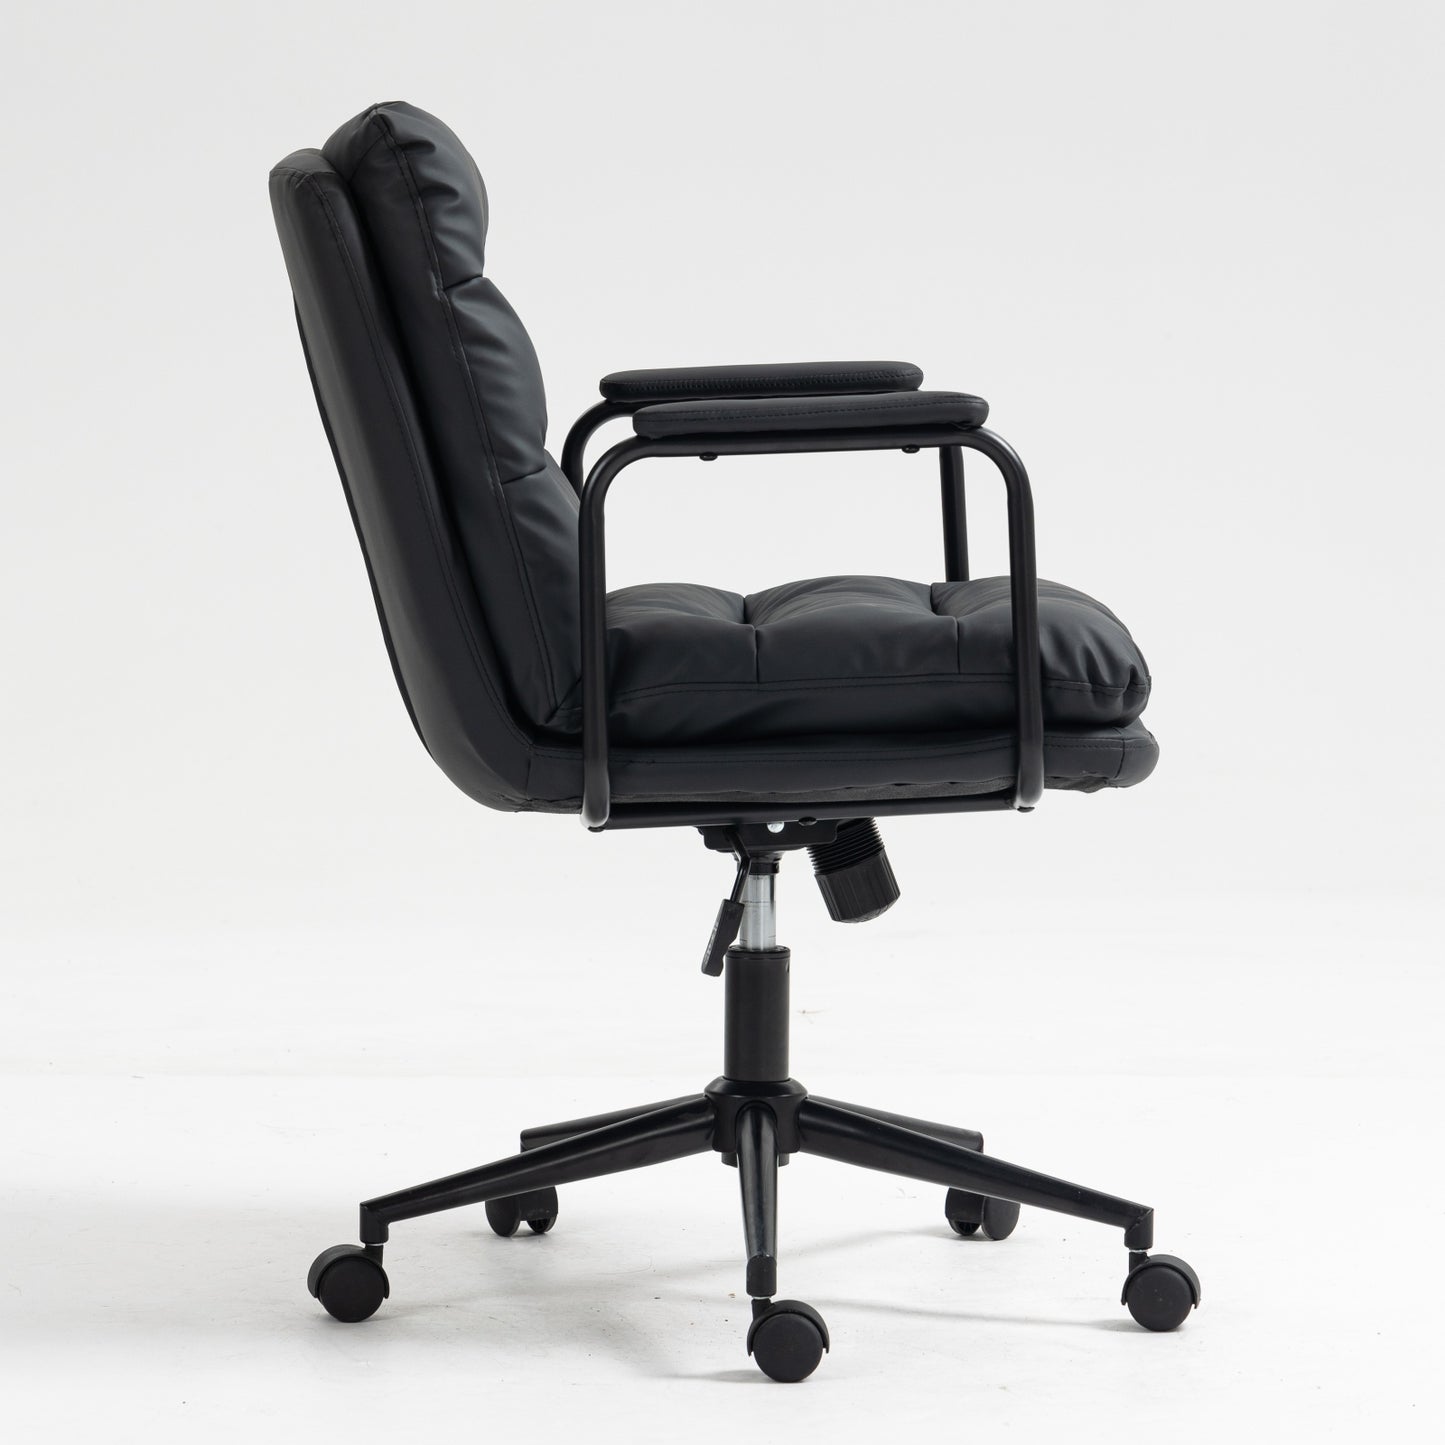 Royton Computer Rolling Swivel Chair in Black PU Leather